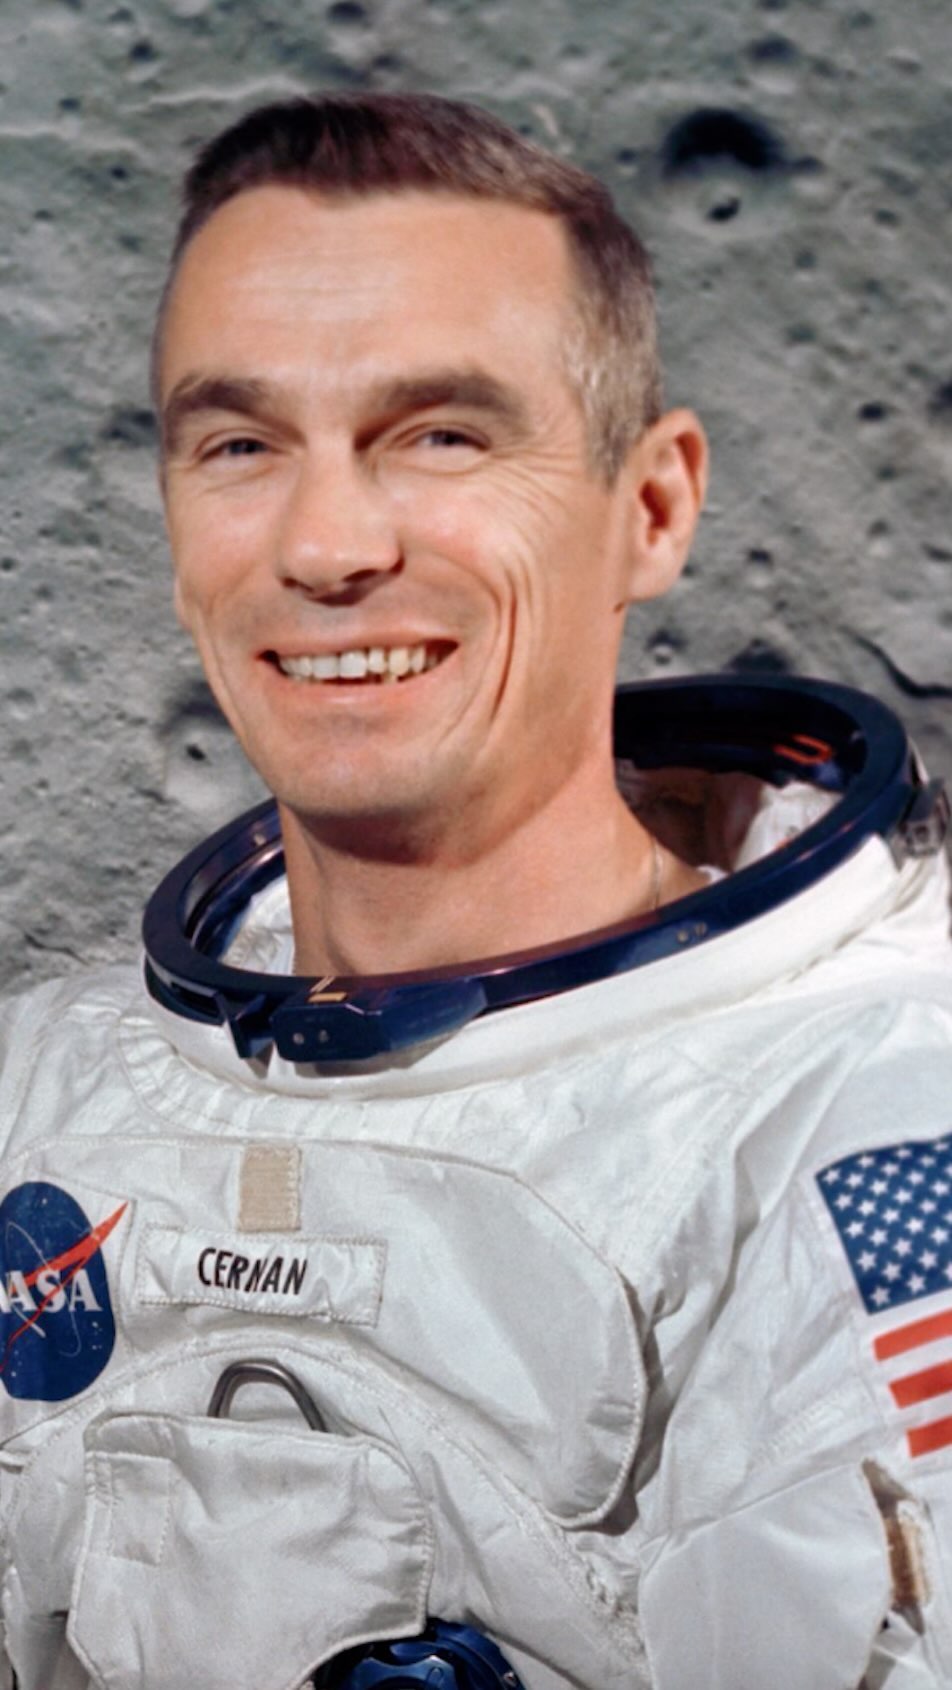 🚀 Eugene Cernan (BS electrical engineering ’56) was the most recent person to walk on the #moon. His historic #Apollo17 mission lifted off 51 years ago today. 

Former #Purdue President Mitch Daniels called him “a true hero, a pioneer in aviation and, to us, one of the greatest Boilermakers of all time.” 

Learn more about Cernan and discover why Purdue is known as the Cradle of Astronauts. 

🔗 in bio to watch video